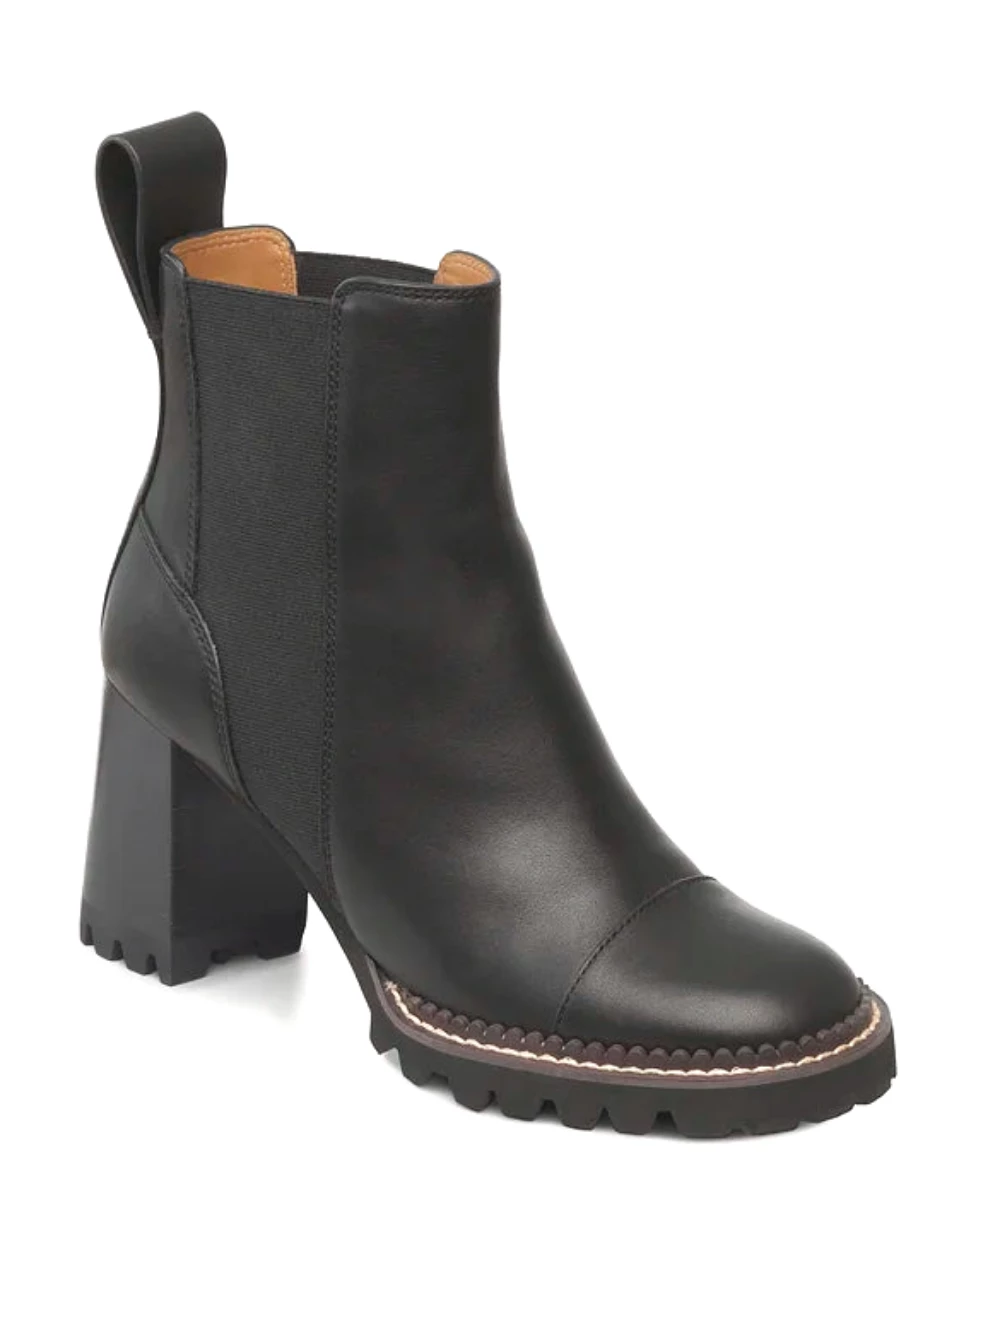 Mallory Black Ankle Boots - SEE BY CHLOE - Liberty Shoes Australia